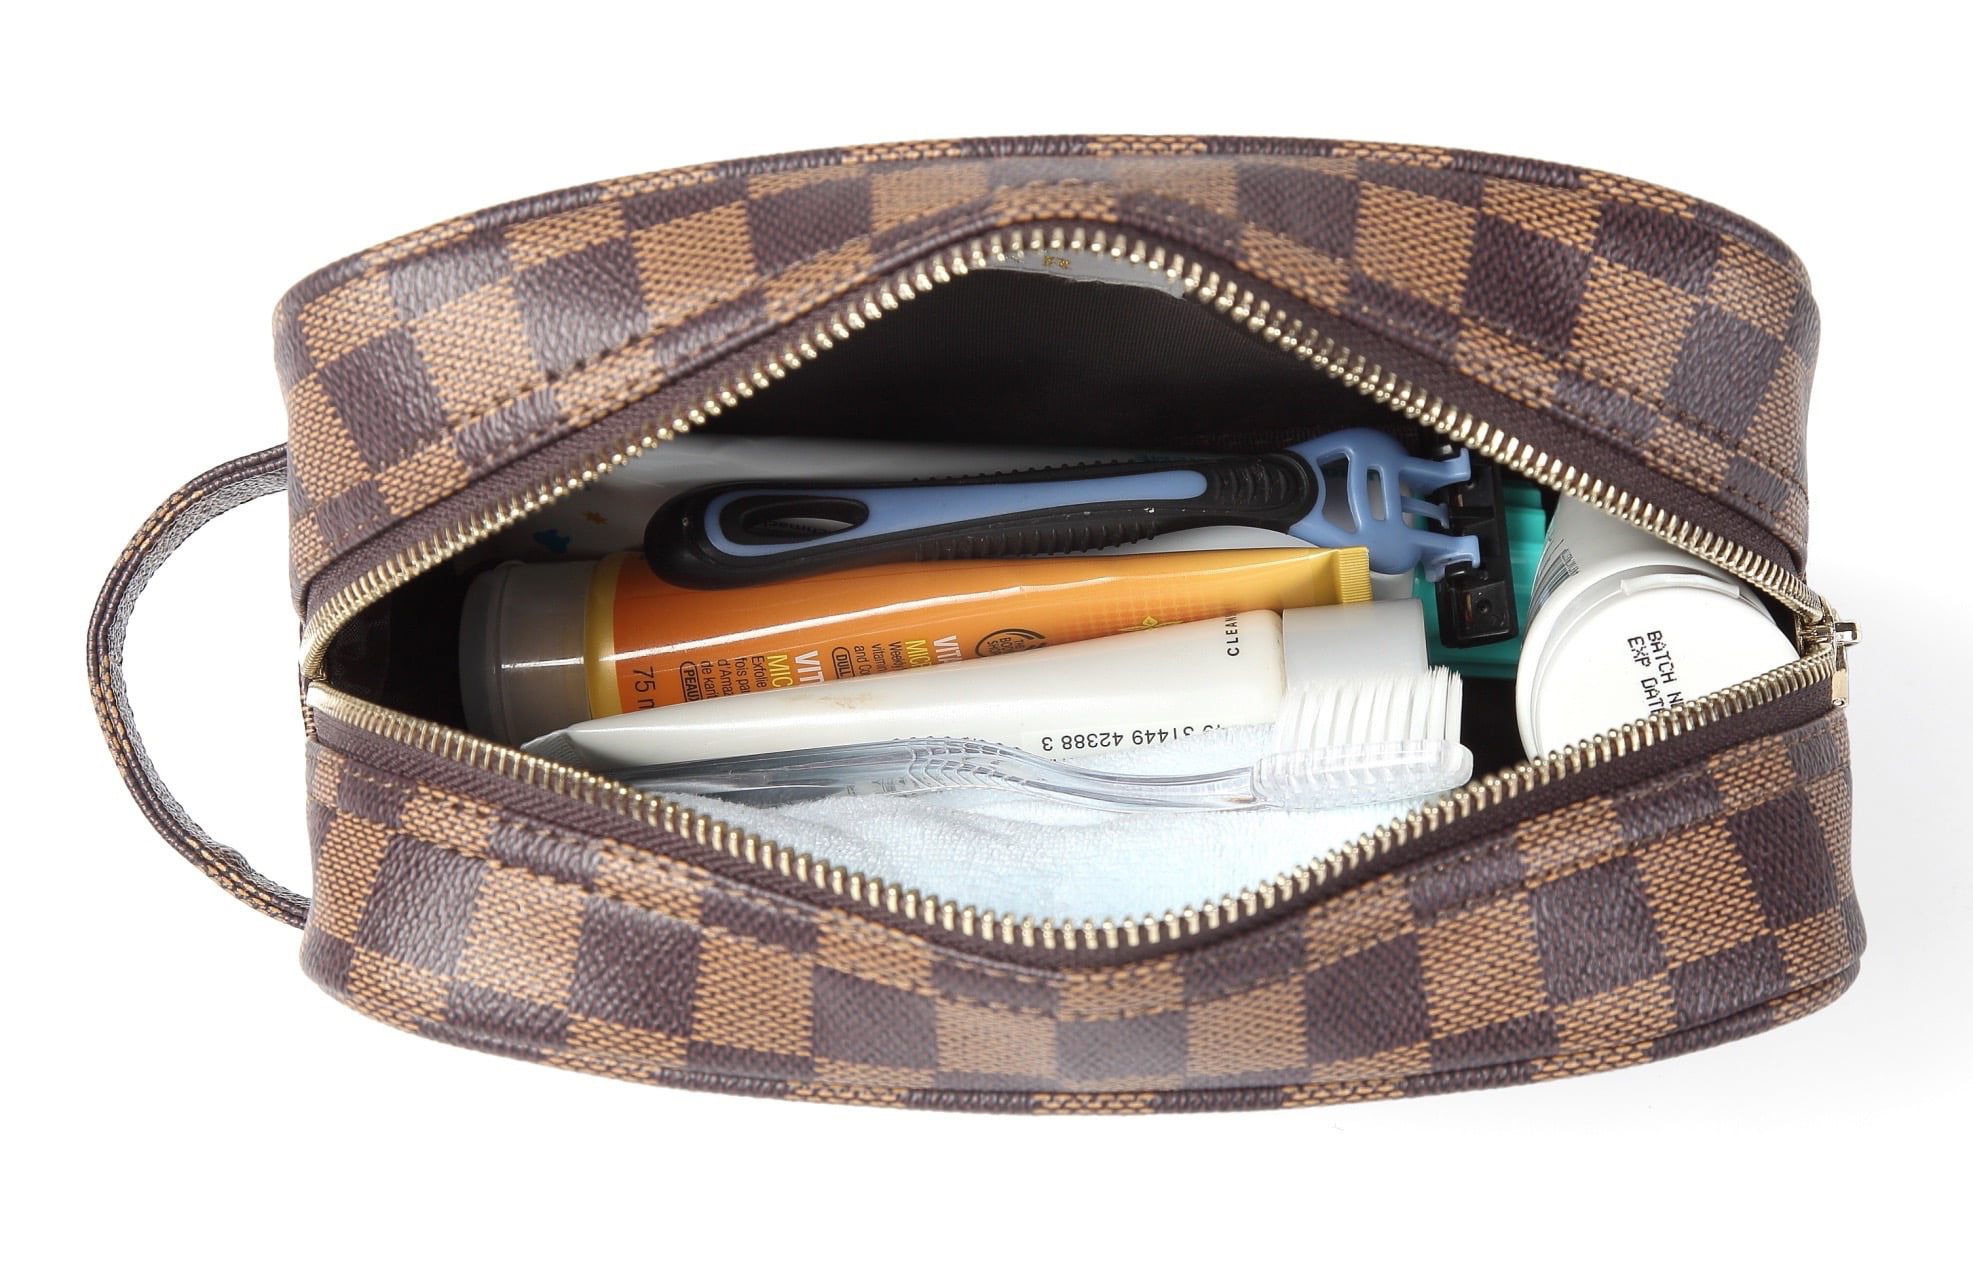 Comparing the Daisy Rose, Luxouria & Wodkeis Brown Checkered Makeup Bags